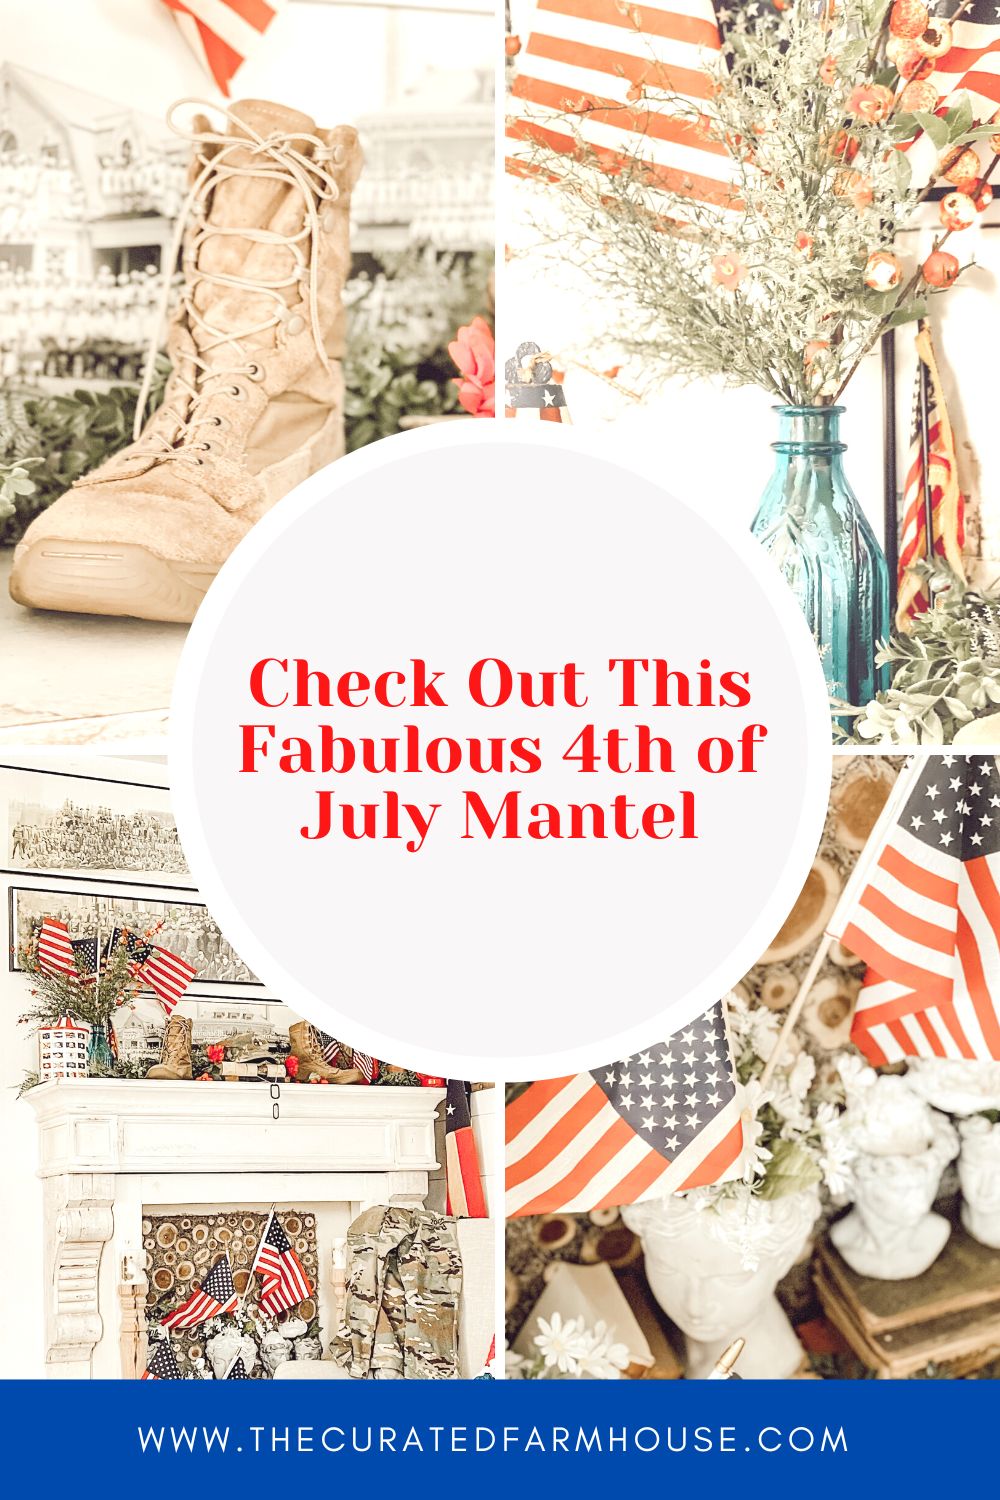 Check Out This Fabulous 4th of July Mantel